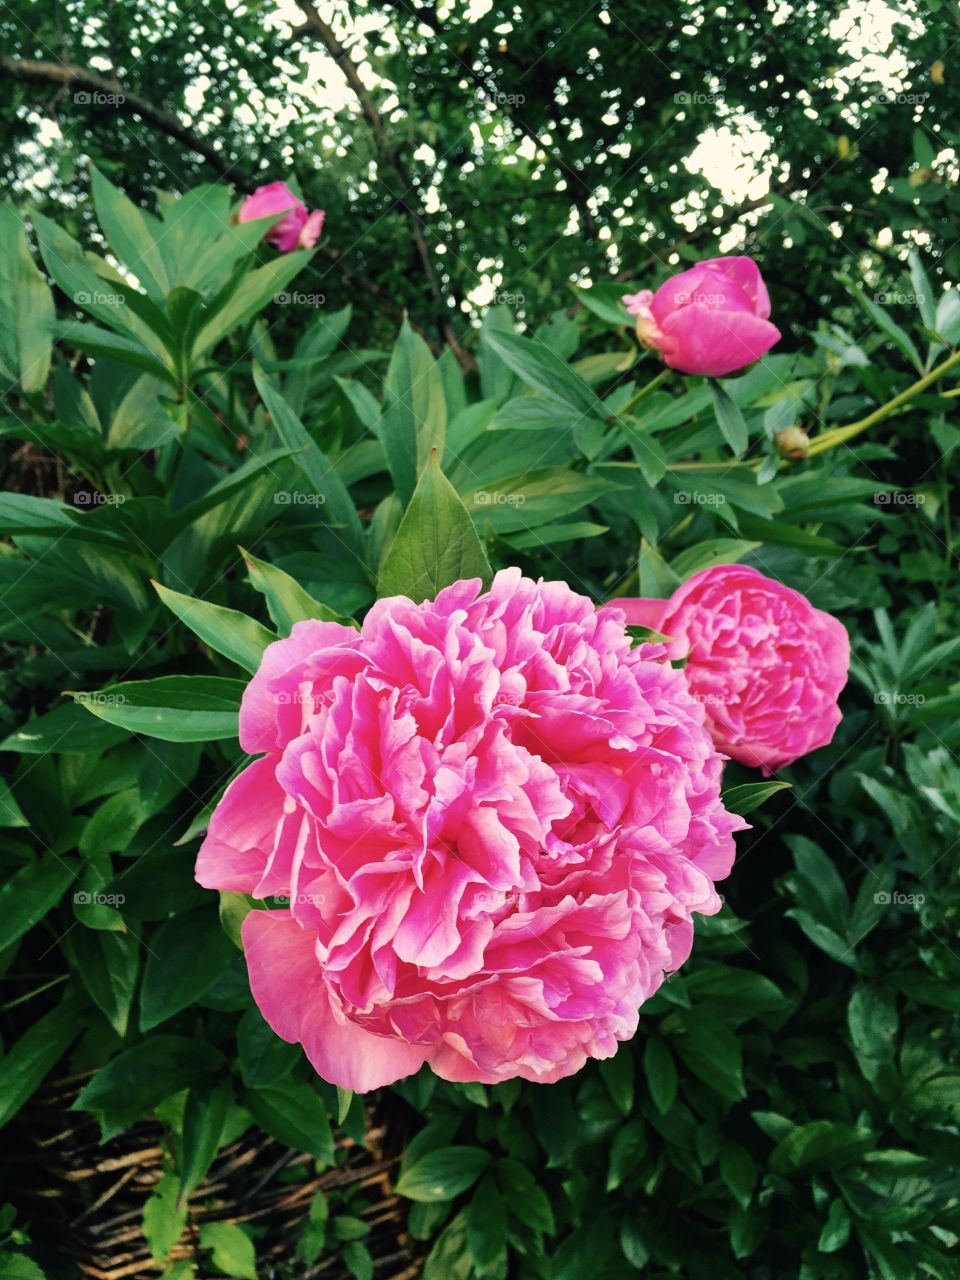 Peony in my garden. My bright pink peonies turn up approximately the same day every year and just look more and more beautiful each year. 